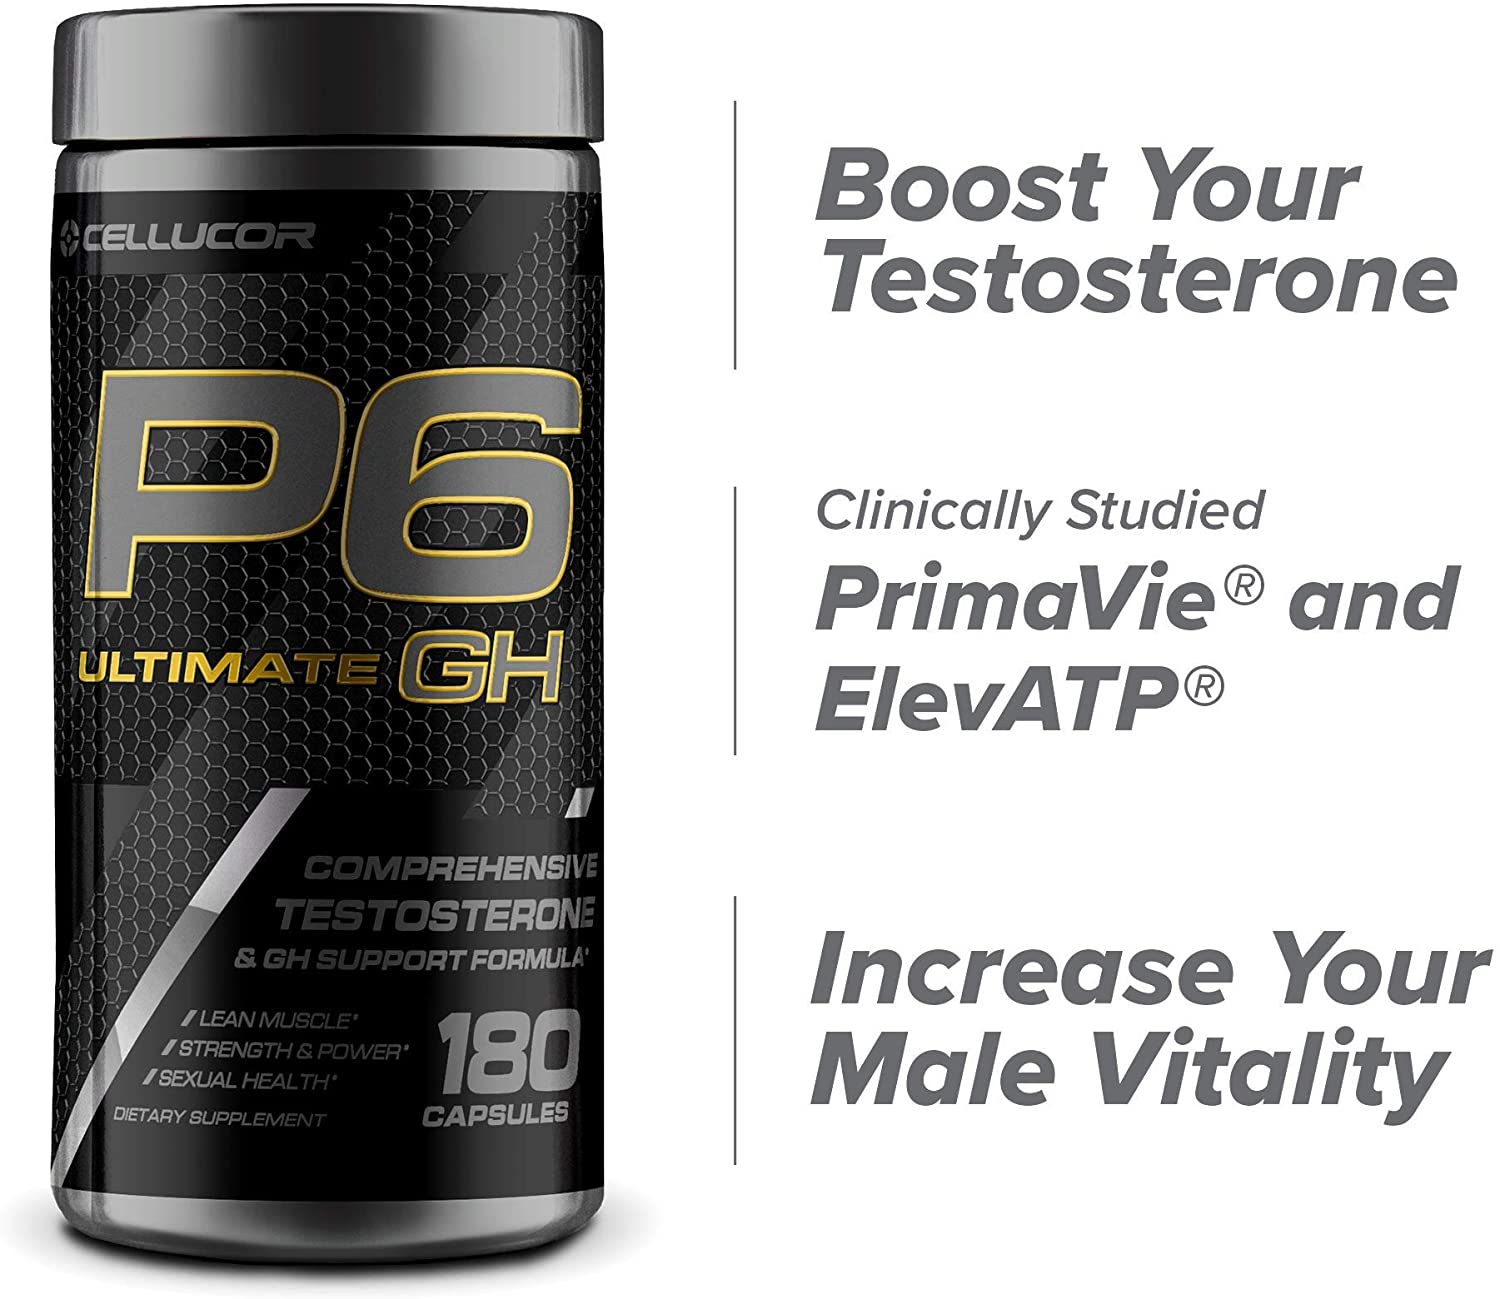 P6 Ultimate GH Testosterone Booster - test booster benefits